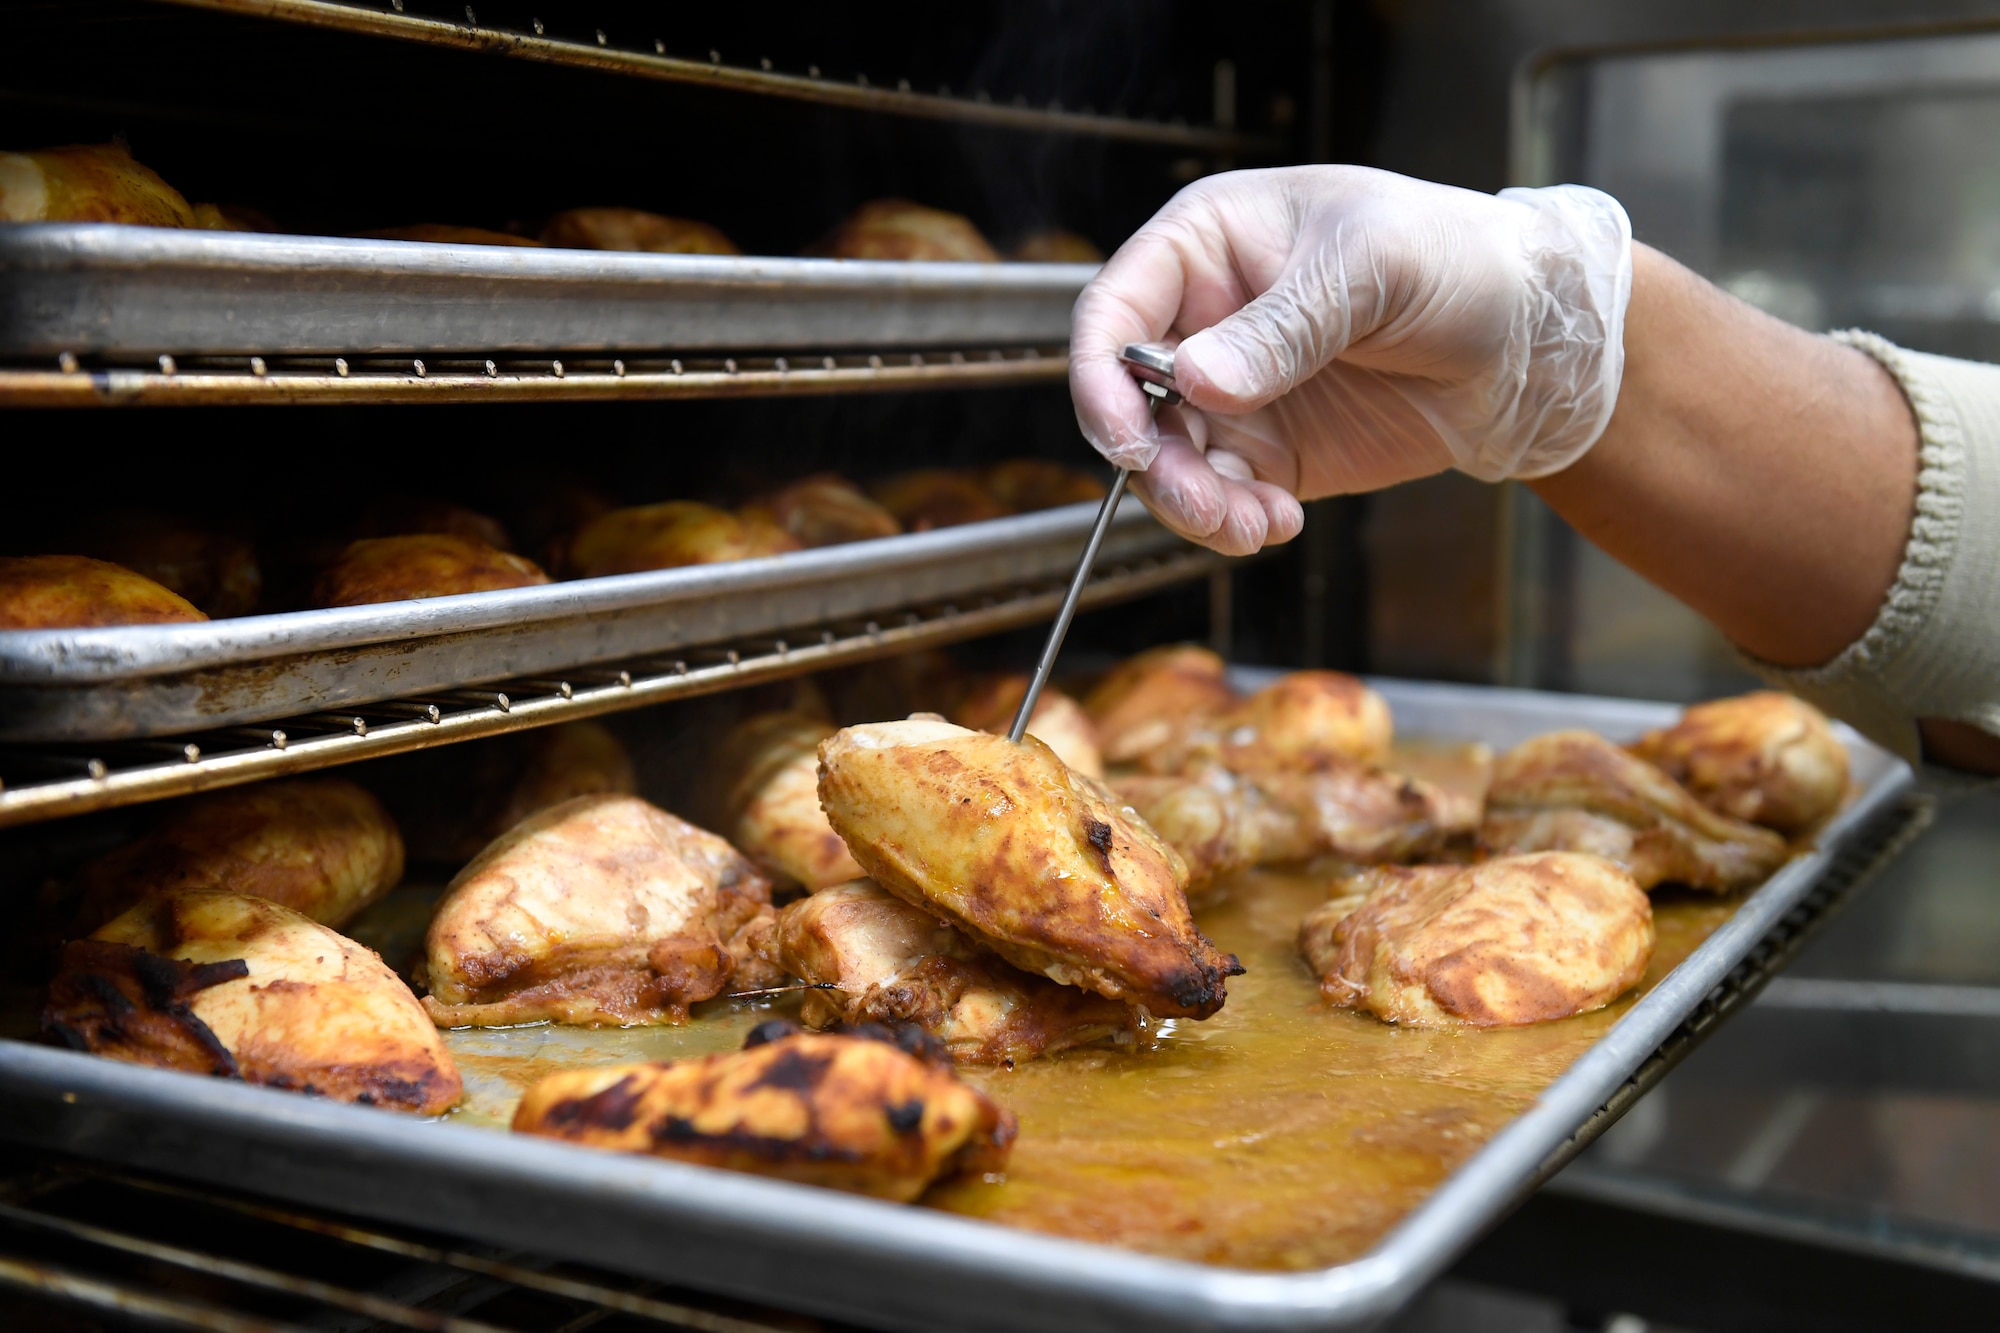 A member from the 145th Force Support Squadron checks the temperature of the chicken to be served for lunch at the North Carolina Air National Guard Base, Charlotte Douglas International Airport, Jan. 12, 2019. Food services Airmen from the North Carolina Air National Guard train members from the Niagara Falls Air Reserve Station, New York, on full-service kitchen operations in preparation for the upcoming Air Force active duty and reserve Hennessy Award competition.